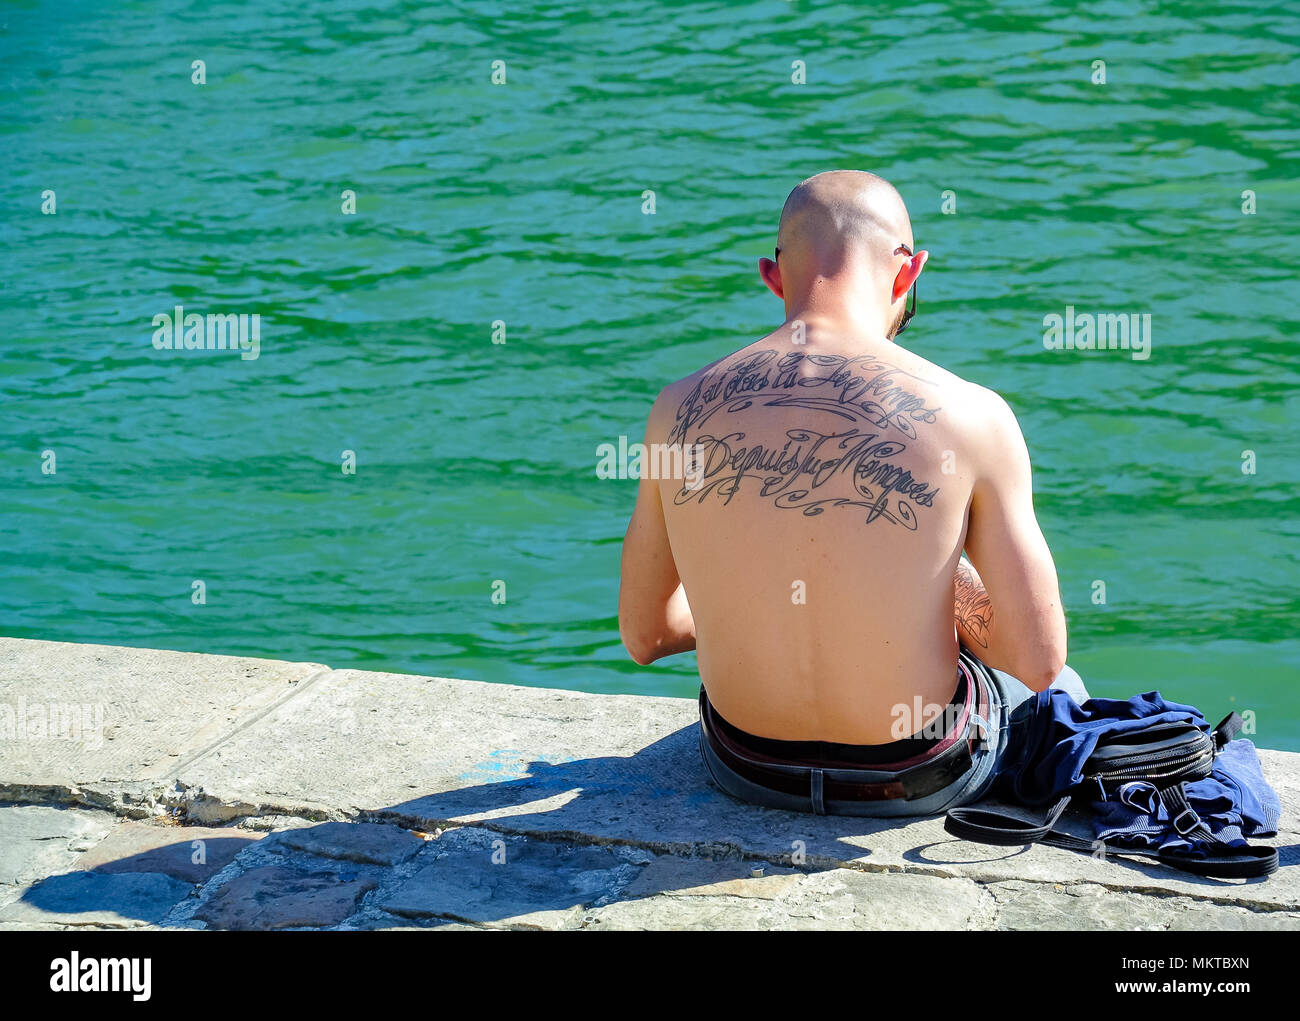 caucasian man with tattoos on his back , seine river, paris, france Stock Photo